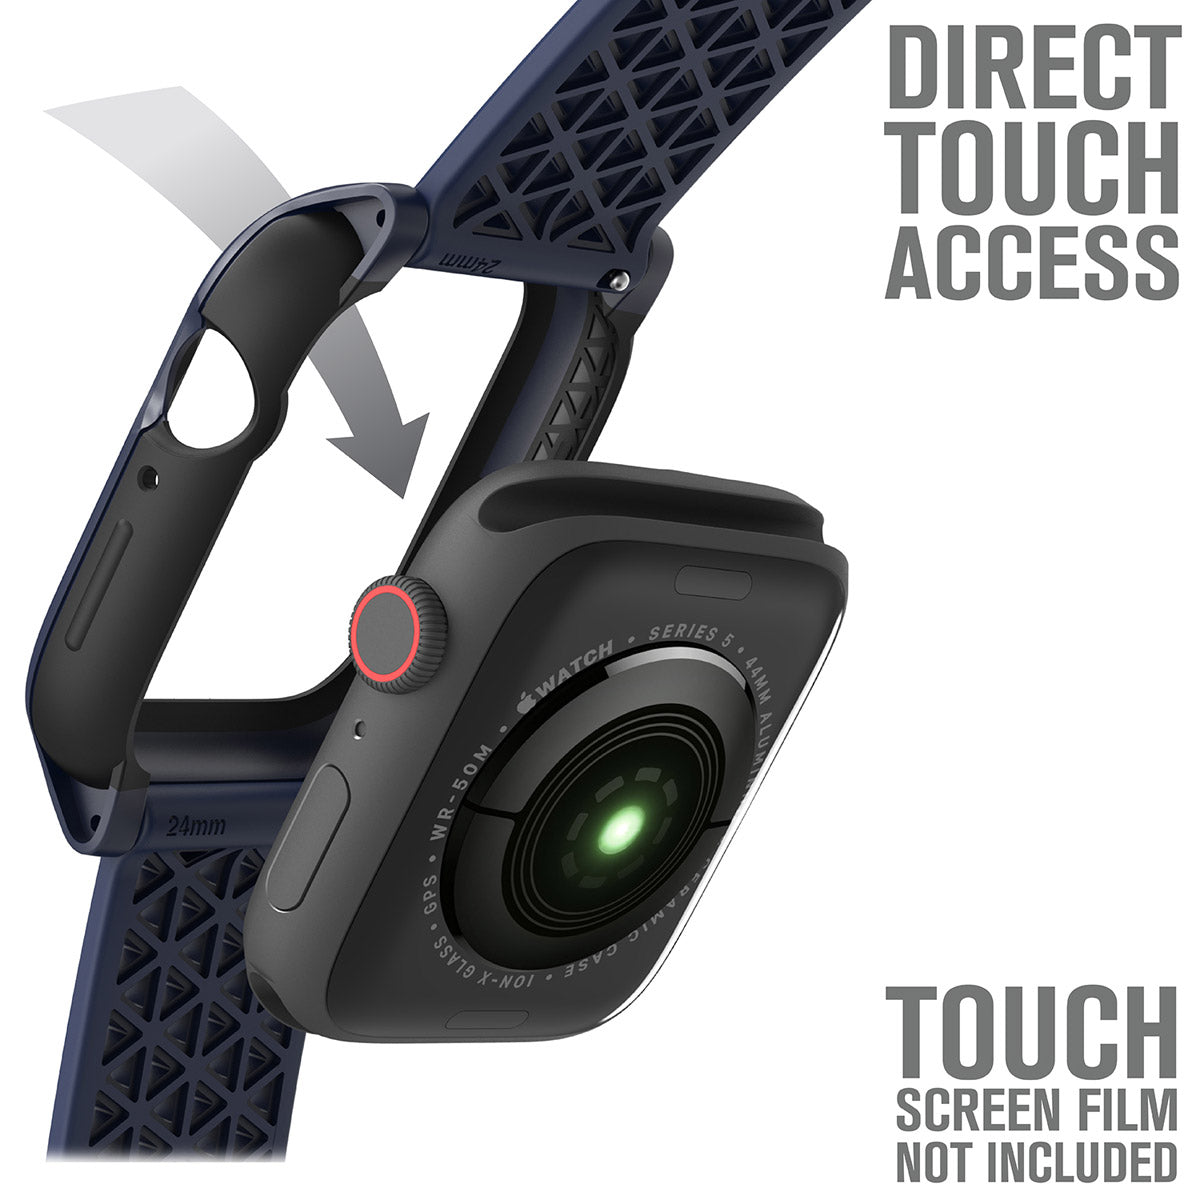 catalyst apple watch series 6 5 4 se gen 21 44mm 40mm impact protection case sport band midnight blue showing the back part of the apple watch and case with direct touch access text reads direct touch access touch screen film not included